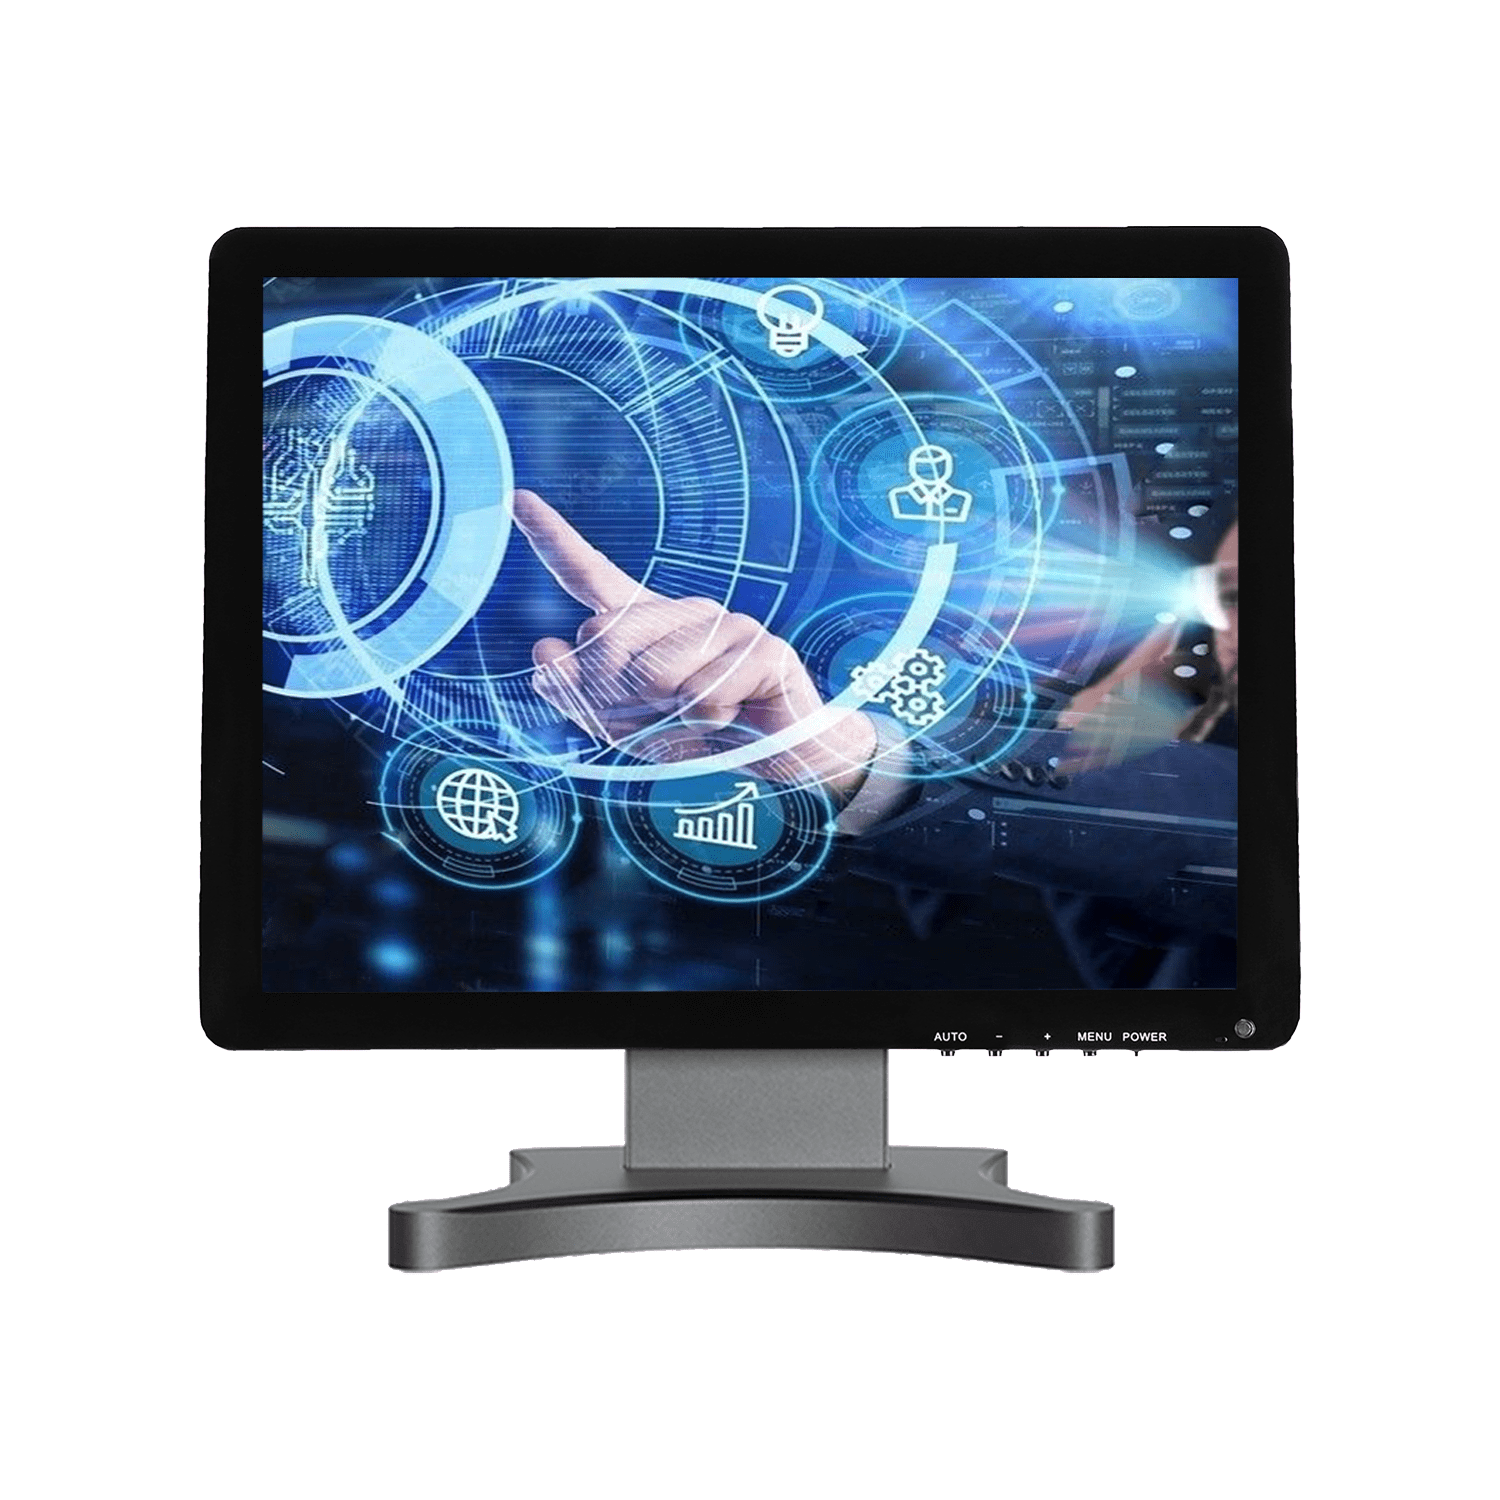 17 inch touch screen monitor